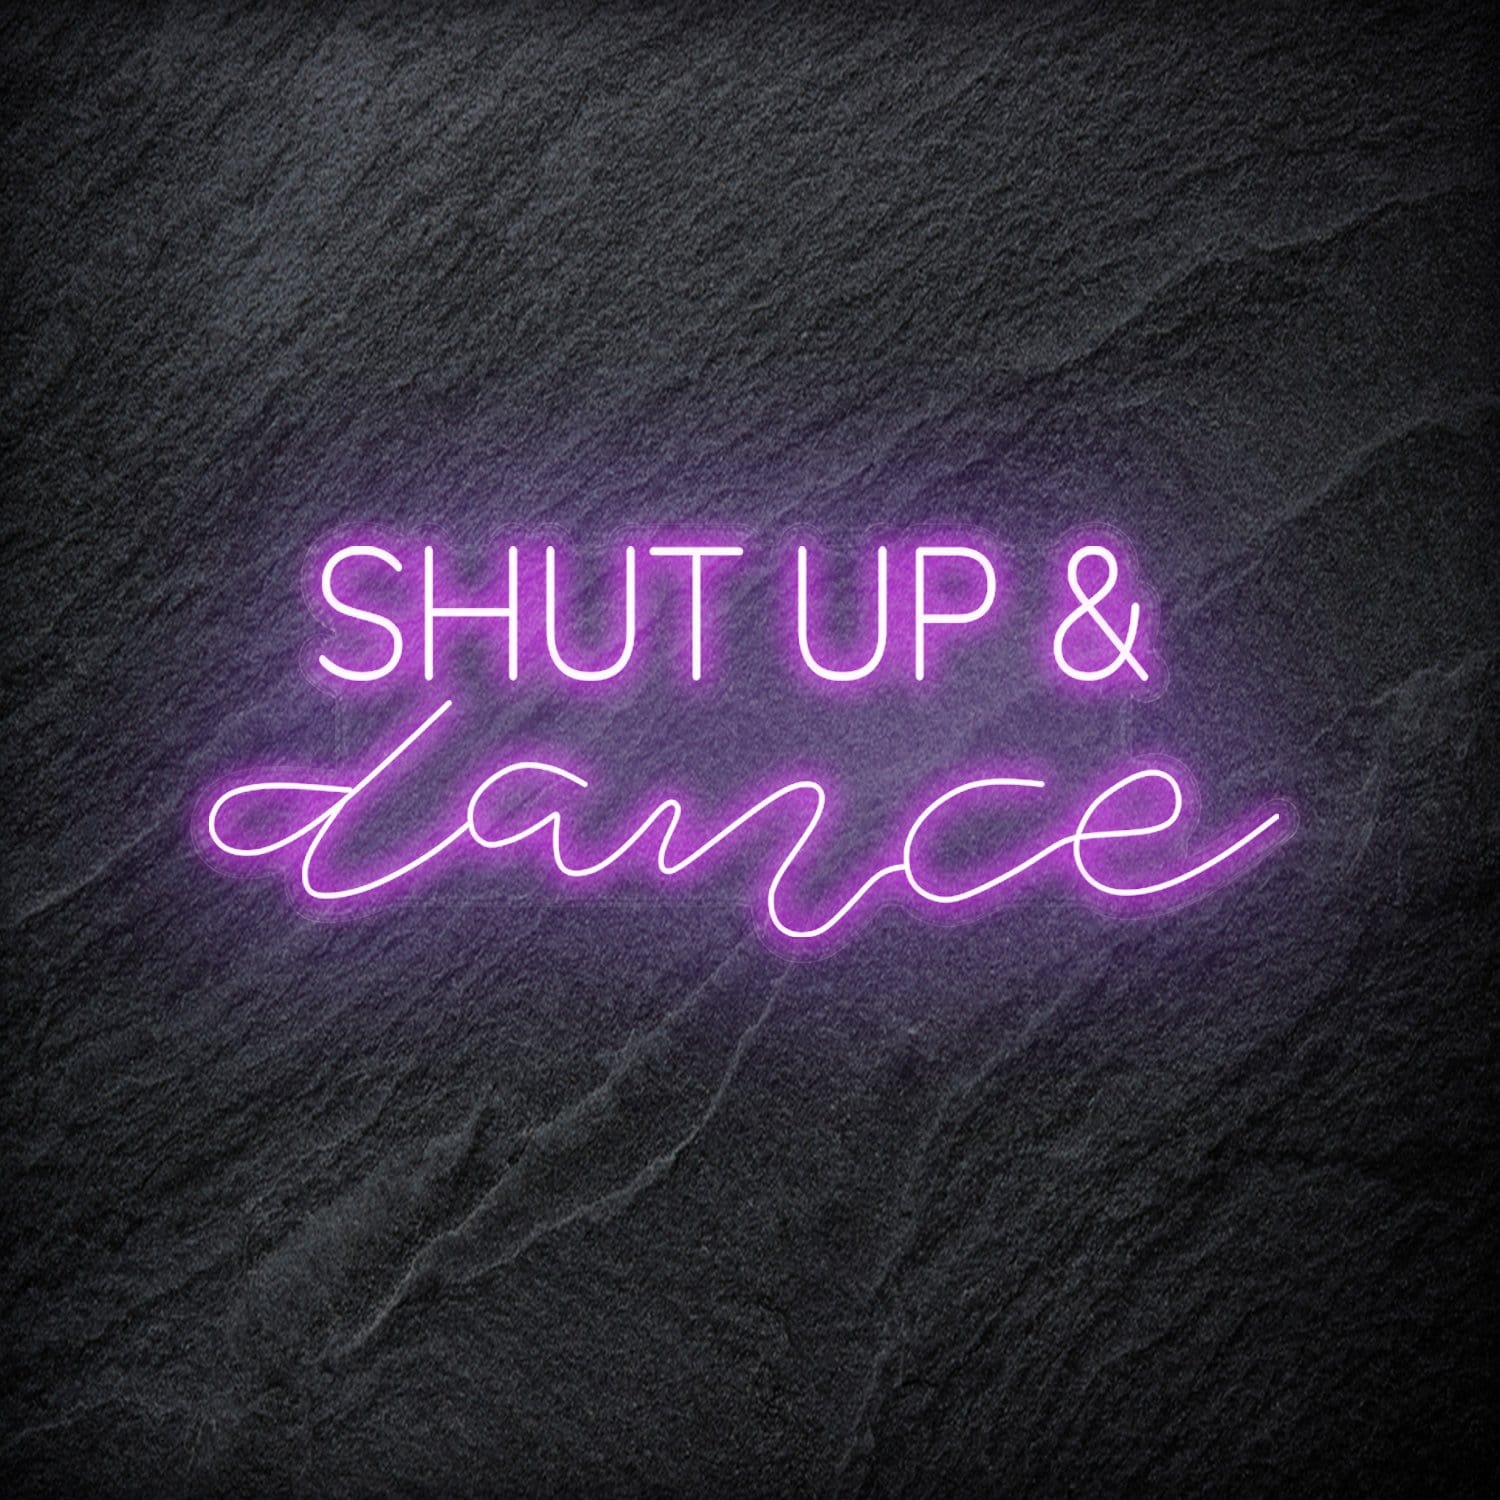 " Shut Up and Dance" LED - NEONEVERGLOW